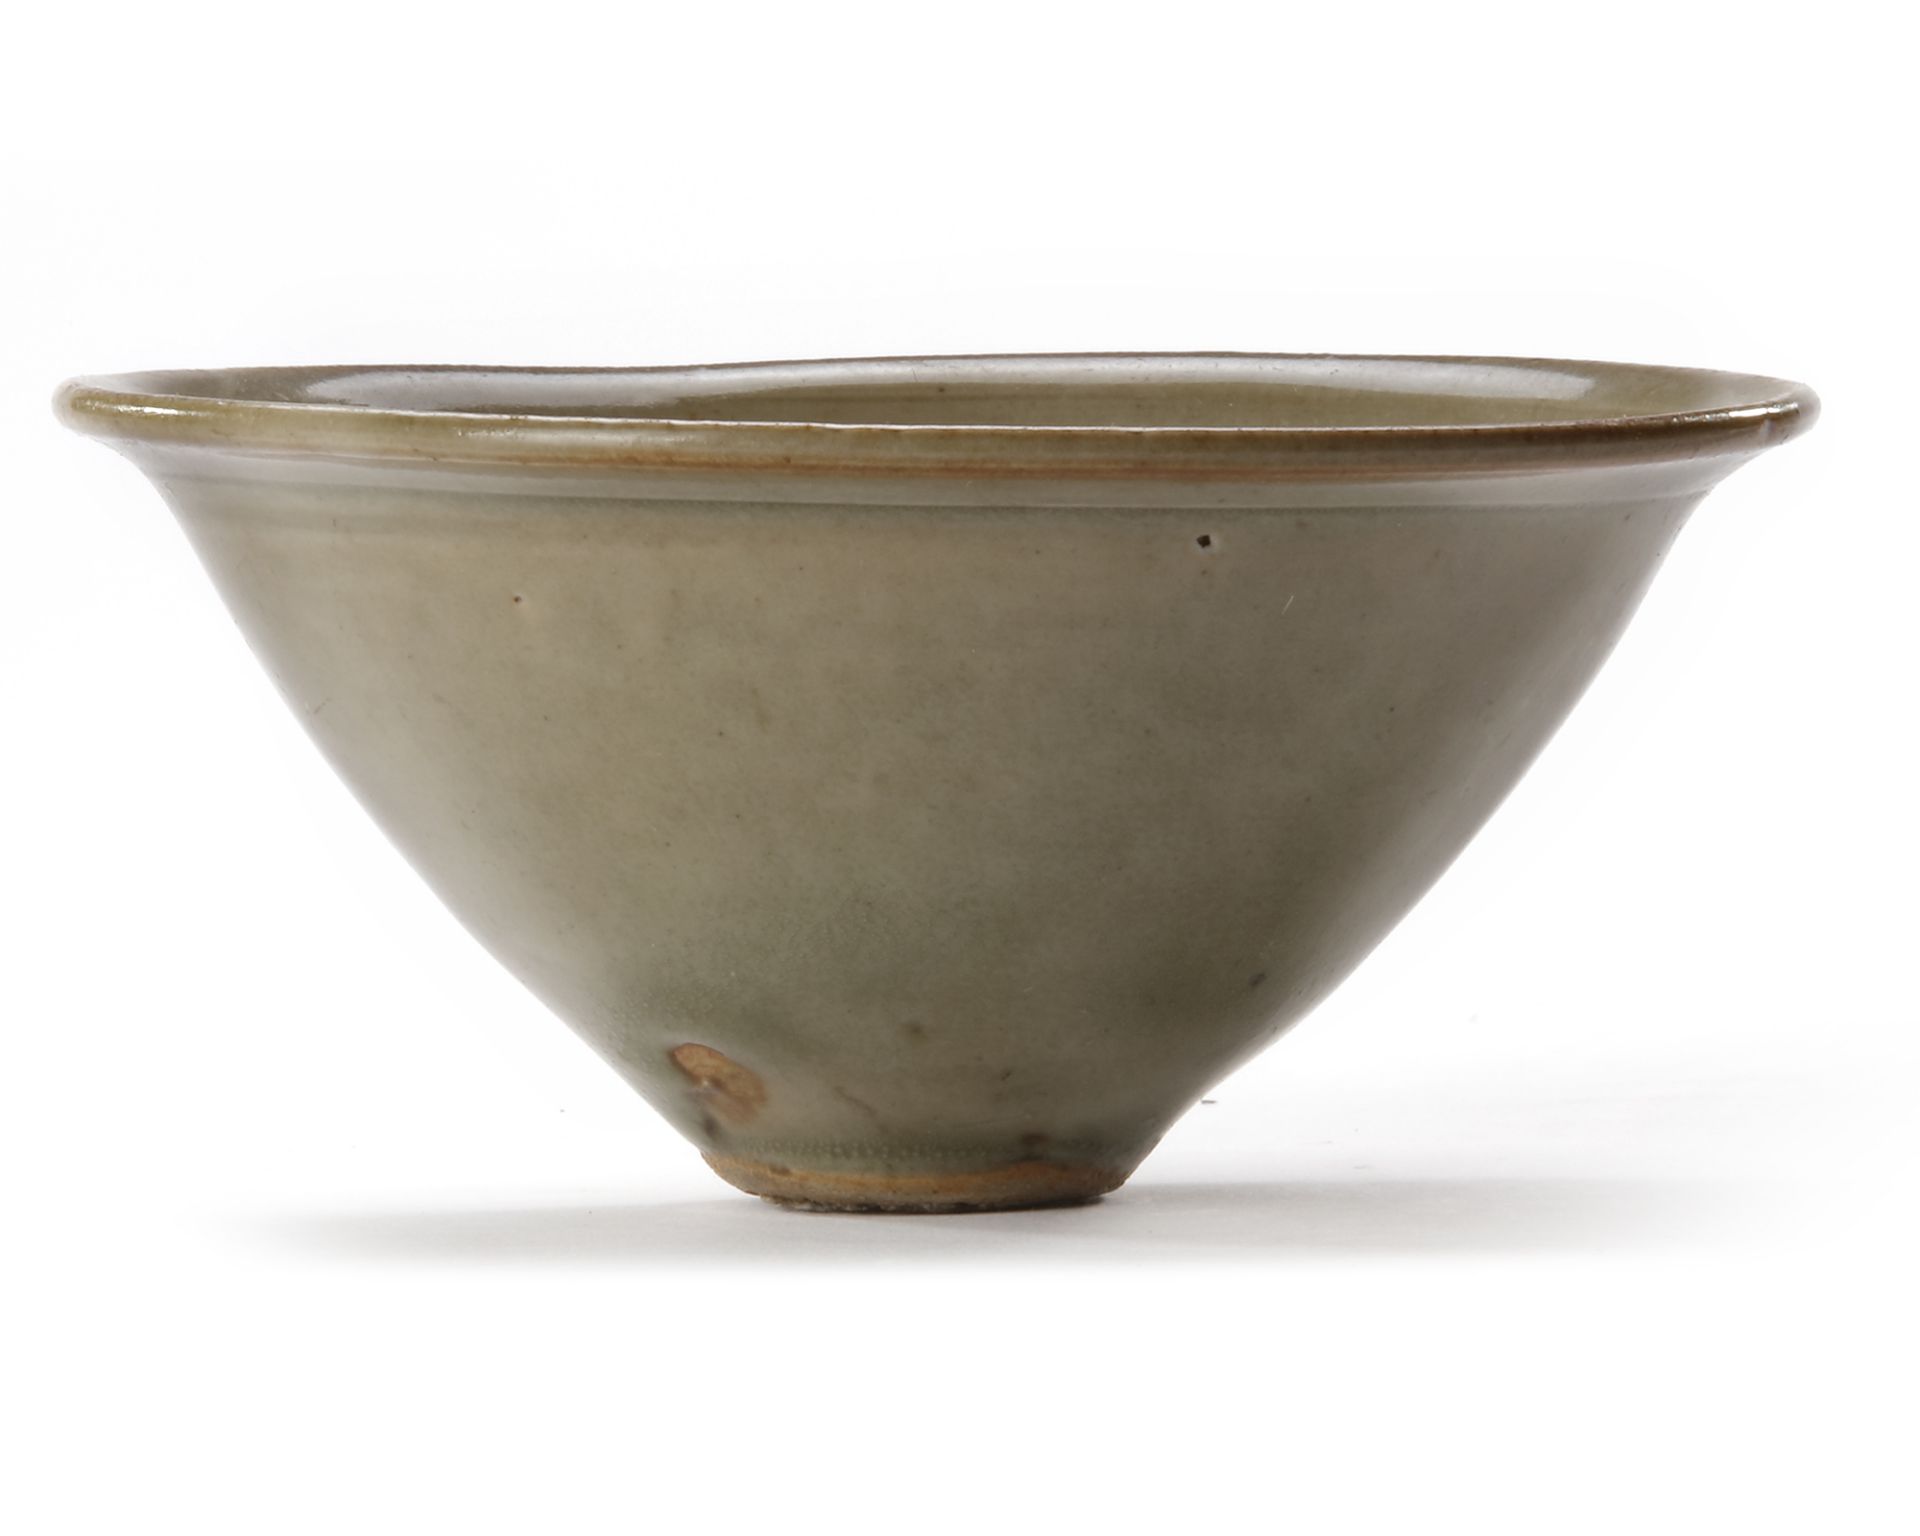 A SMALL CHINESE CELADON BOWL, SONG DYNASTY (960-1127) - Image 2 of 4